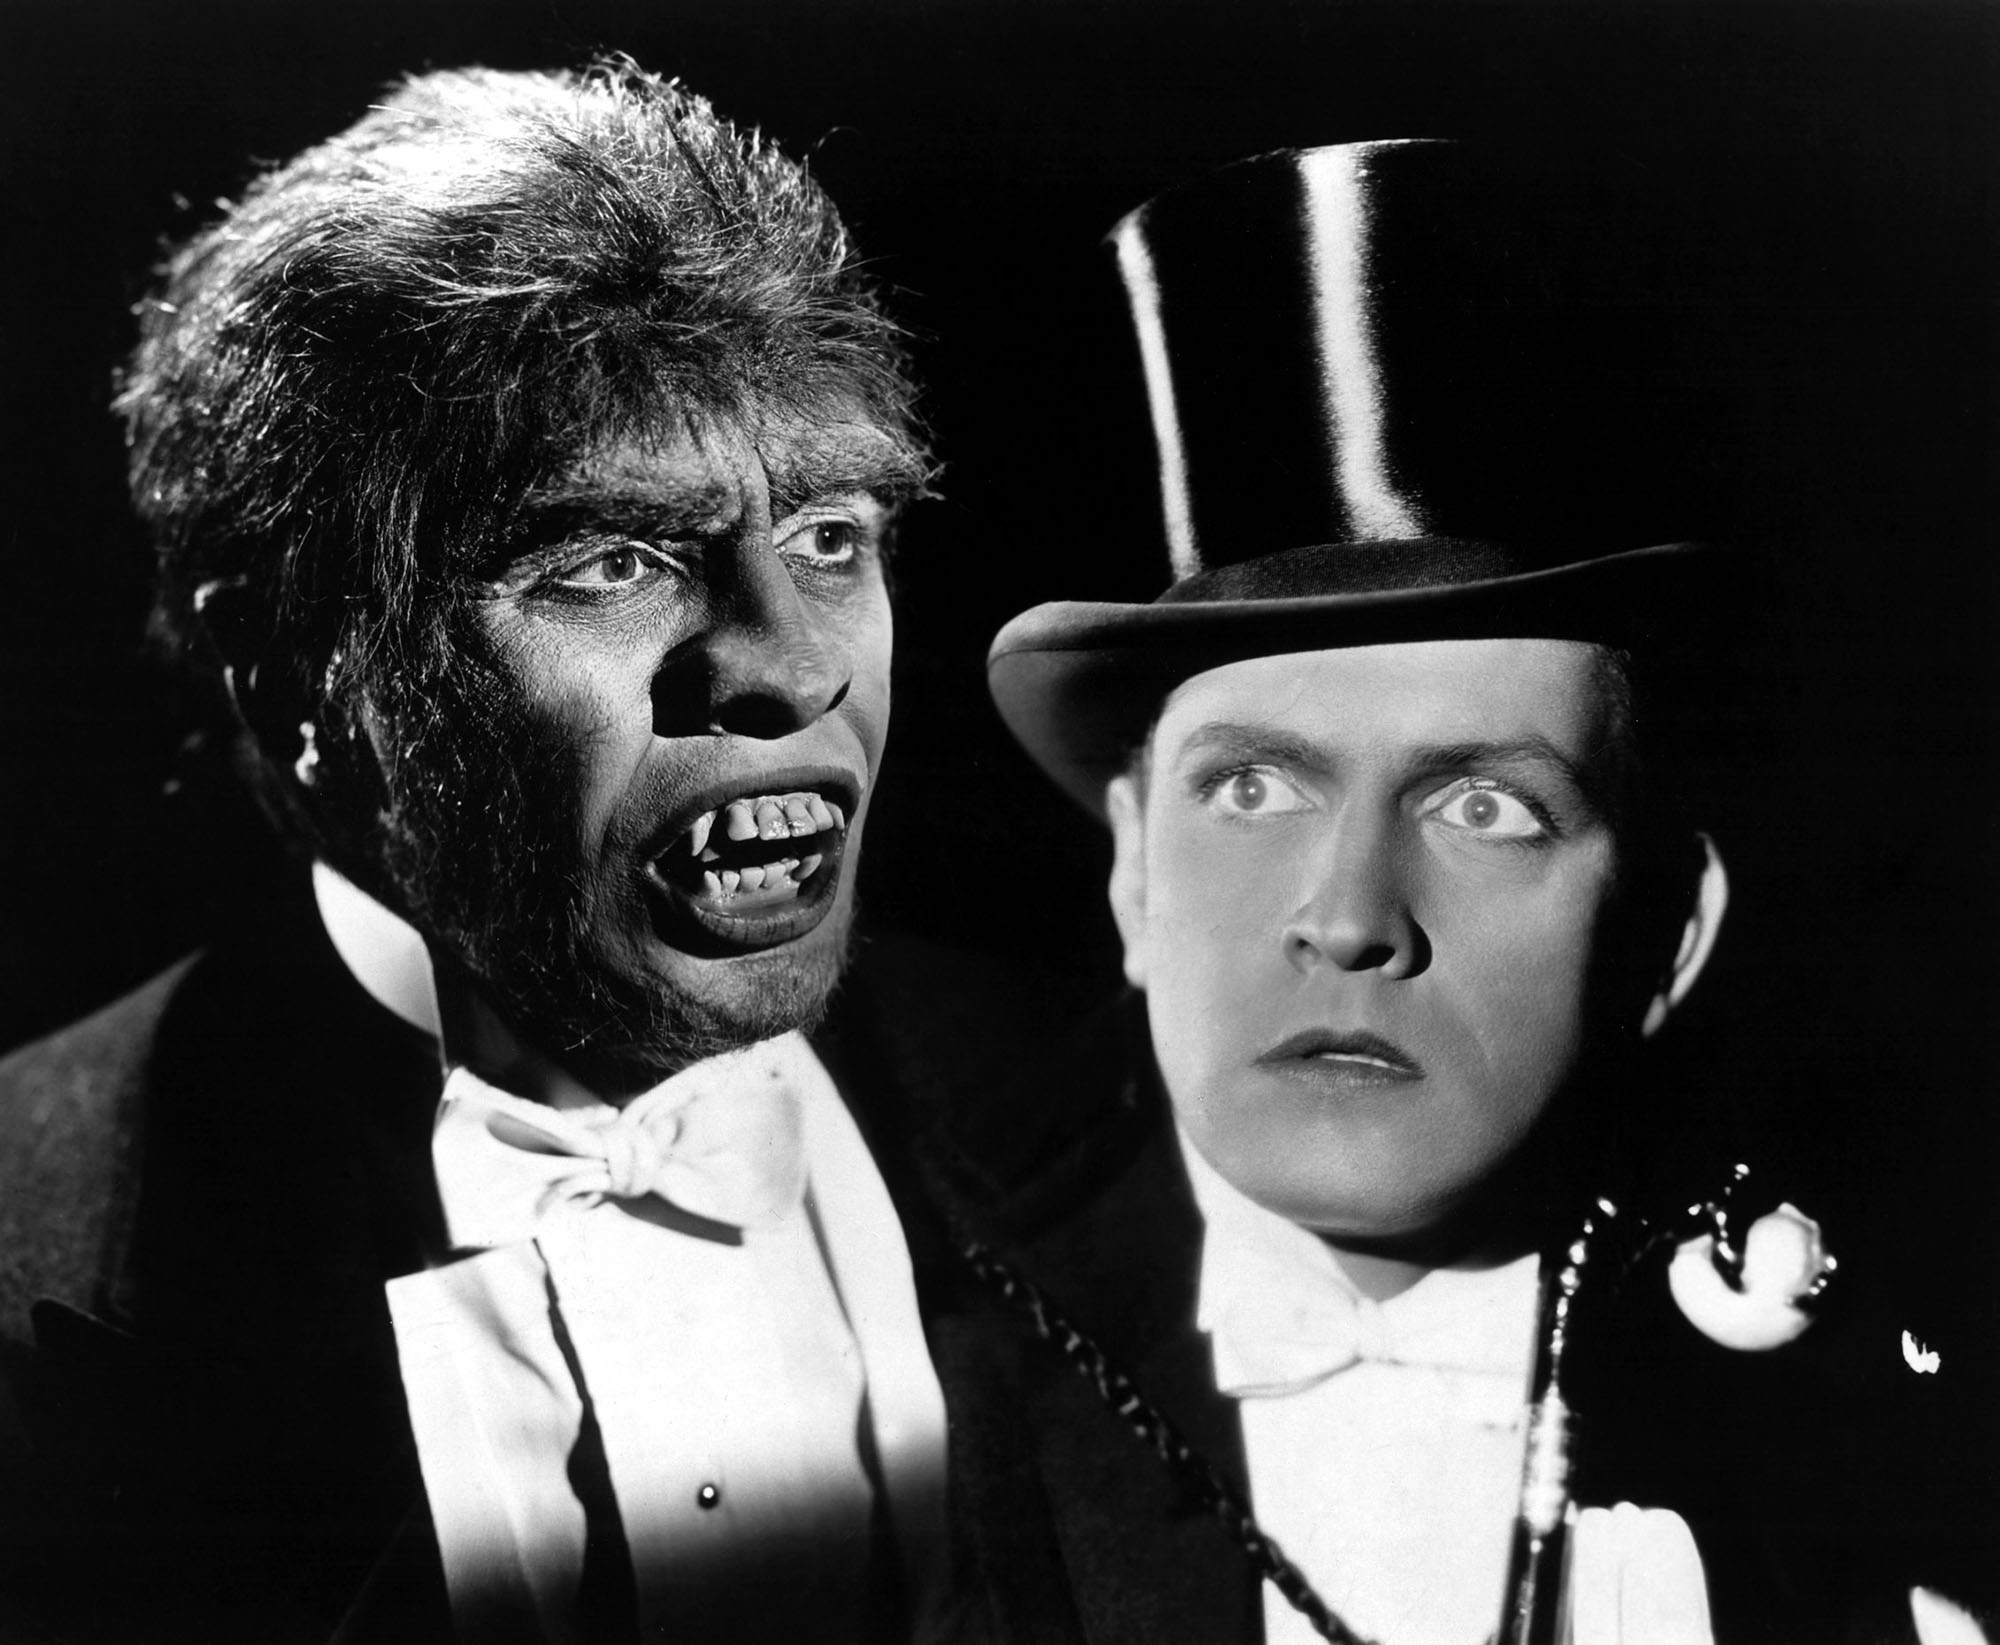 black and white promotional image for the 1931 movie "Dr. Jekyll and Mr. Hyde," showing star in dual role as Mr. Hyde (on the left, a deformed monstrous looking creature wearing a dress shirt and tux) and Dr. Jekyll, on the right, looking in shock at Mr. Hyde while also wearing a tux and shirt, with a top hat.